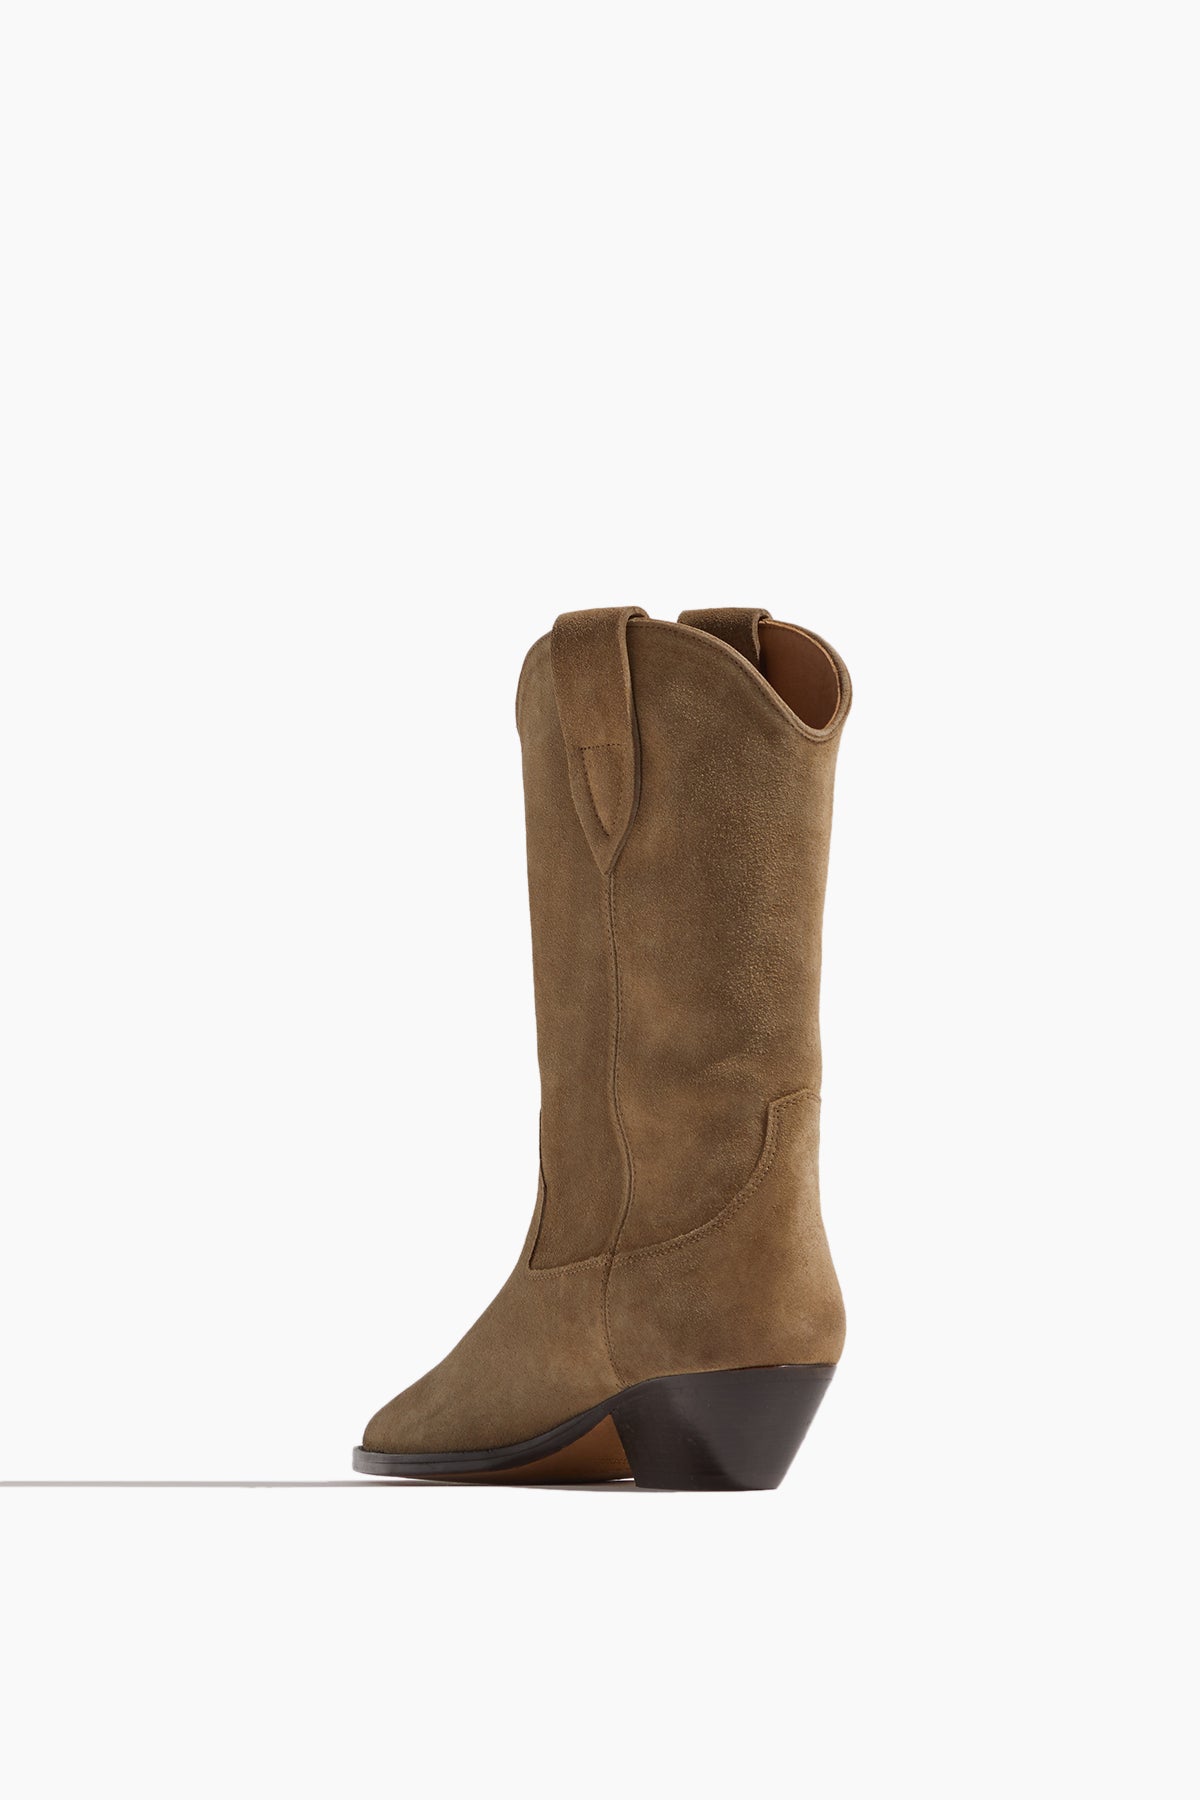 Isabel Marant Shoes Ankle Boots Duerto Boot in Taupe Isabel Marant Duerto Boot in Taupe